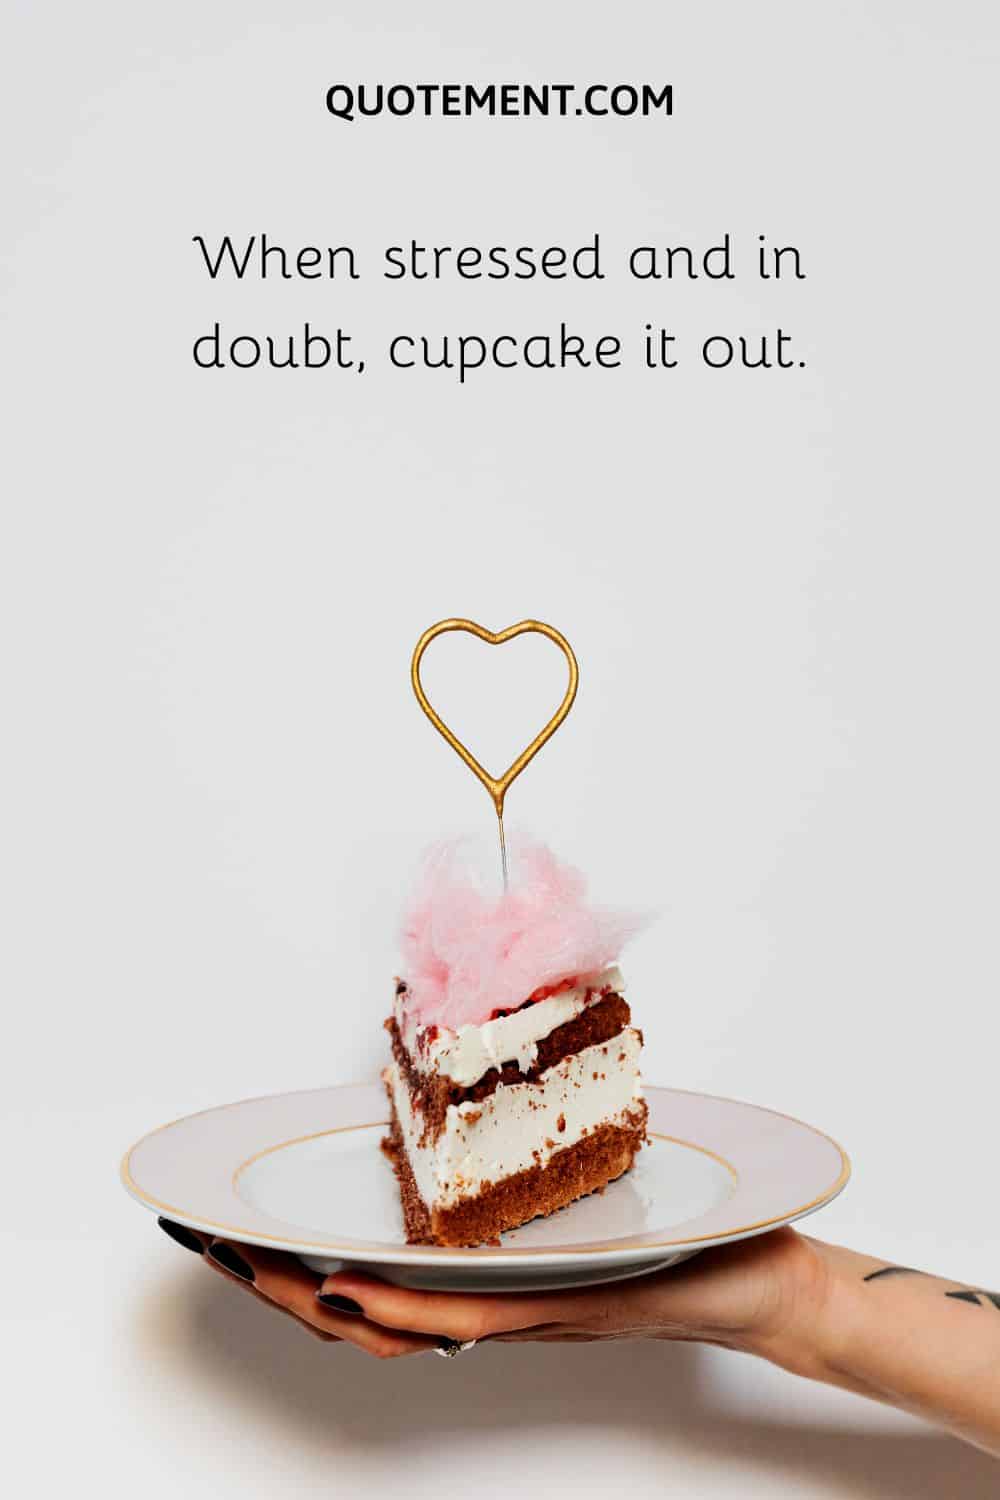 When stressed and in doubt, cupcake it out